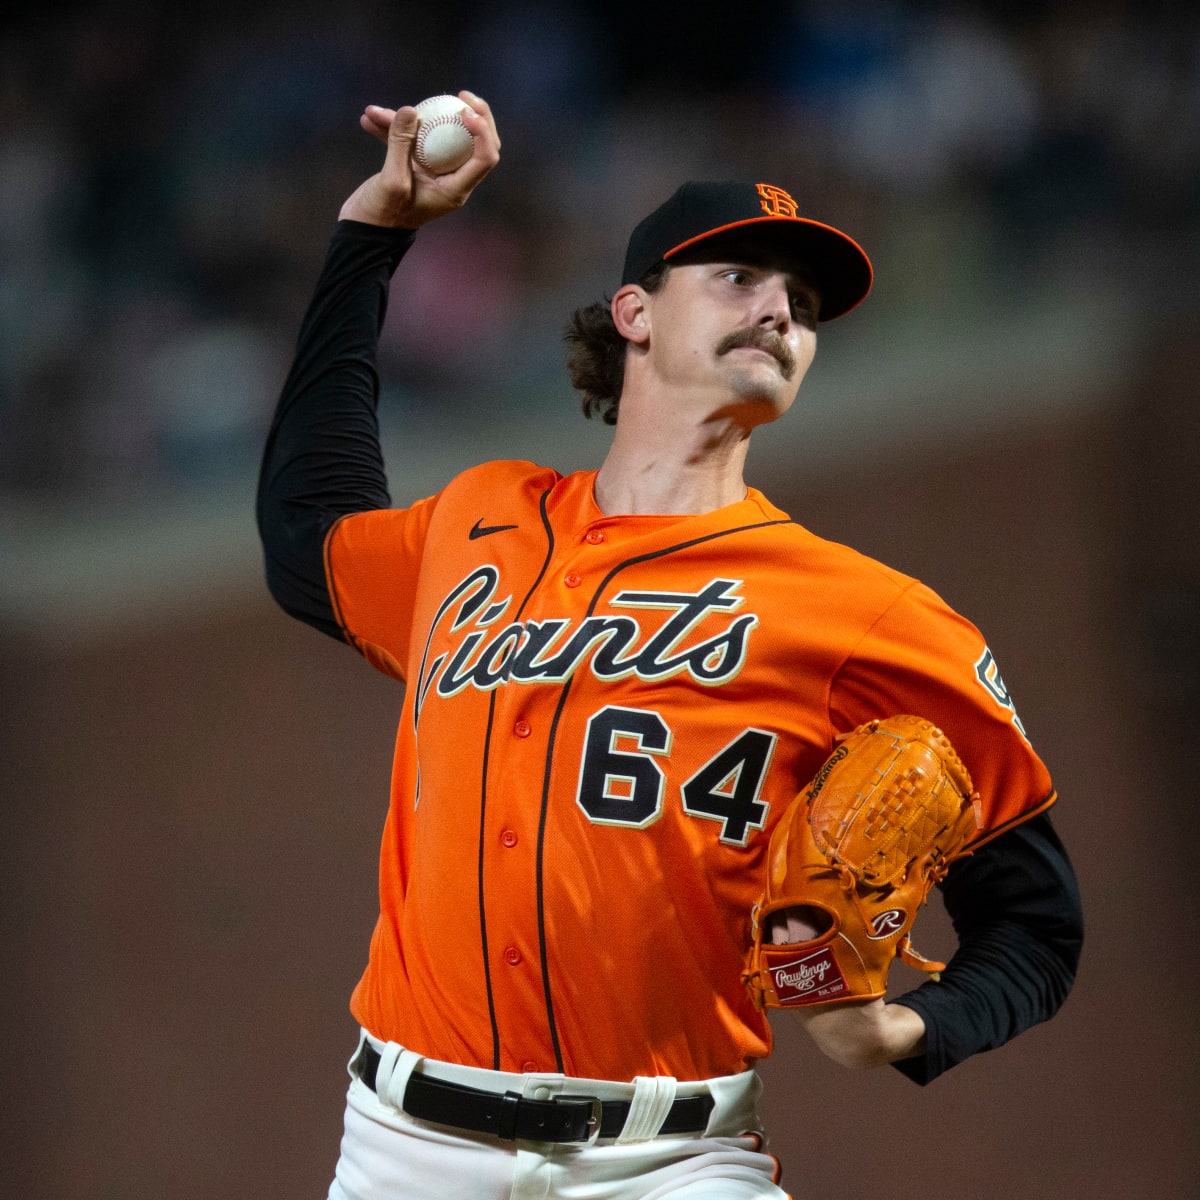 SF Giants recall RHP Sean Hjelle from Triple-A for doubleheader